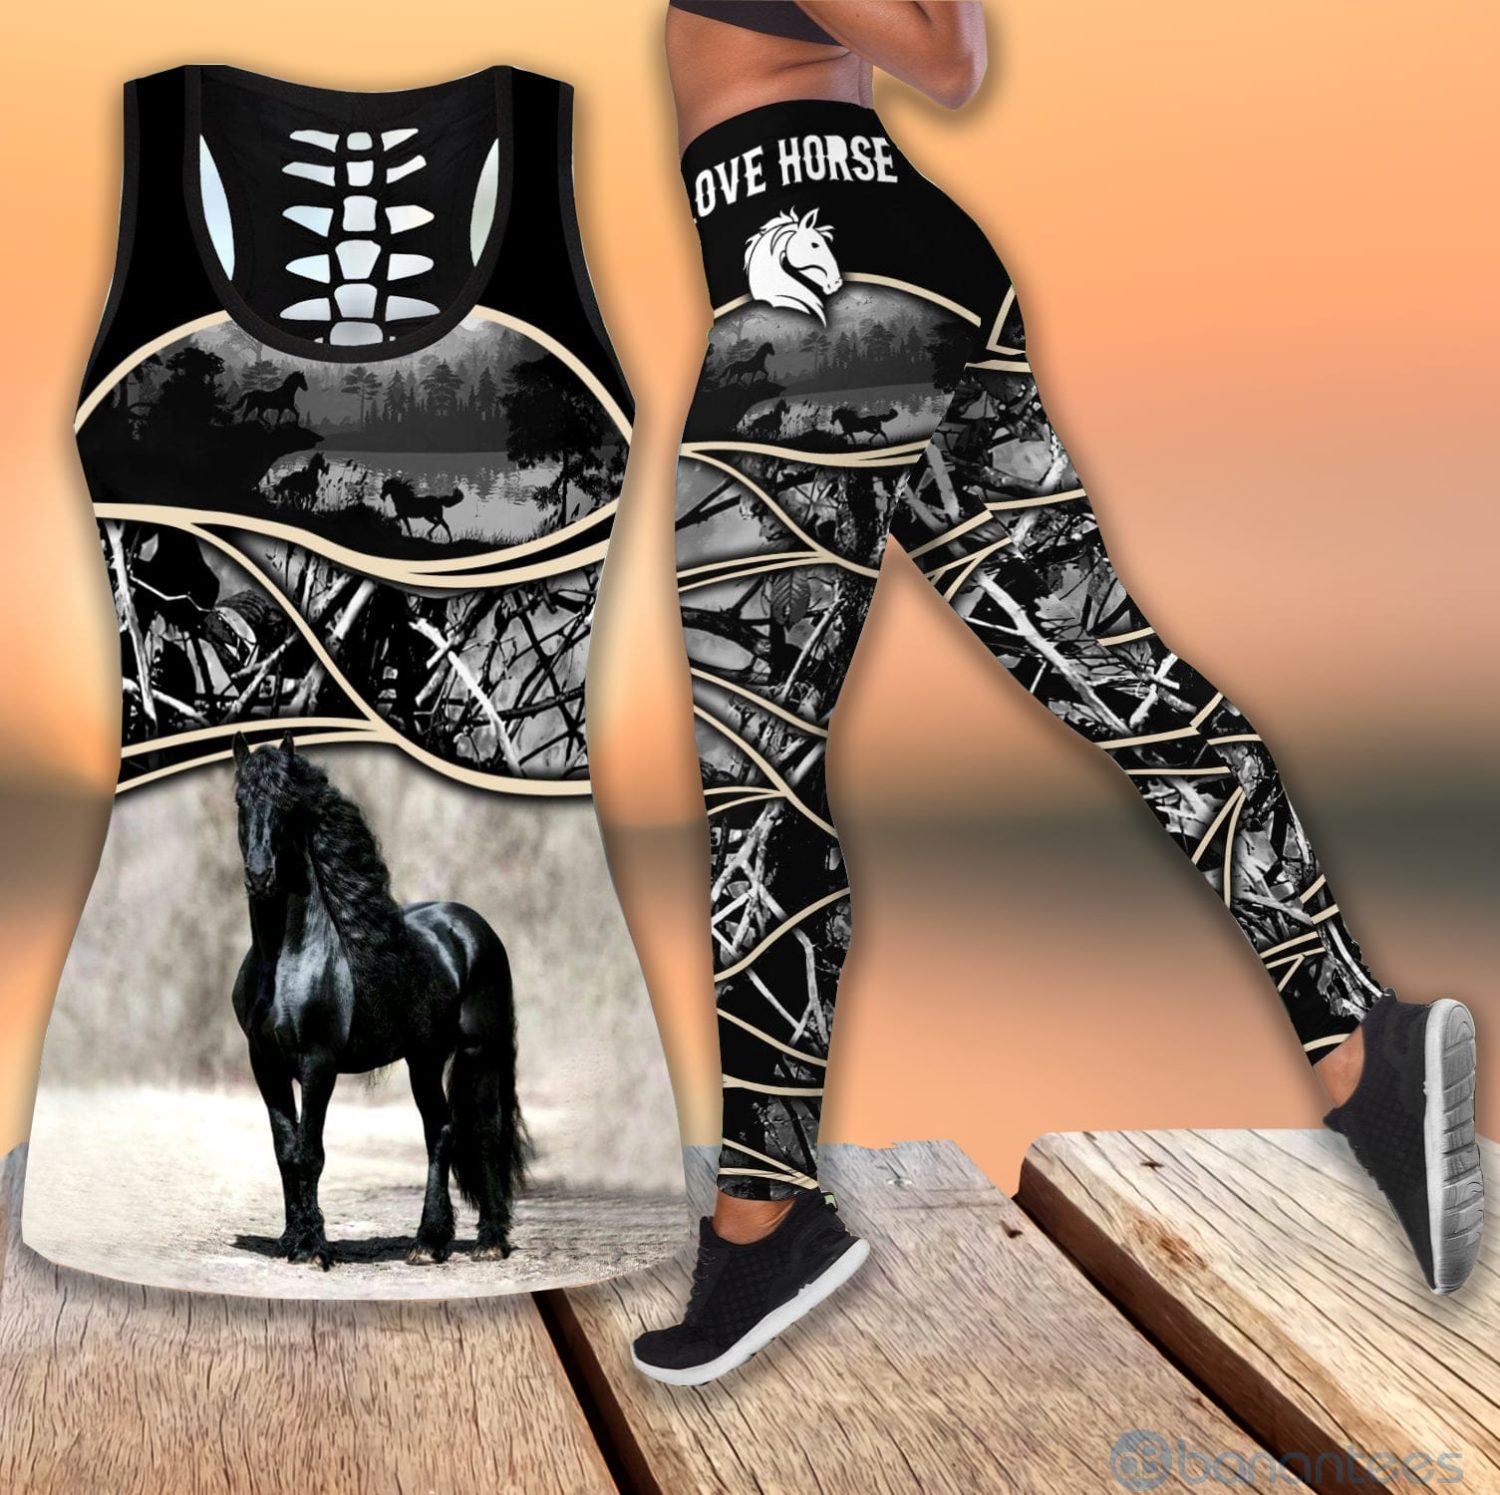 Love Horse Horse Hunting Hollow Tank Top Legging Set Outfit